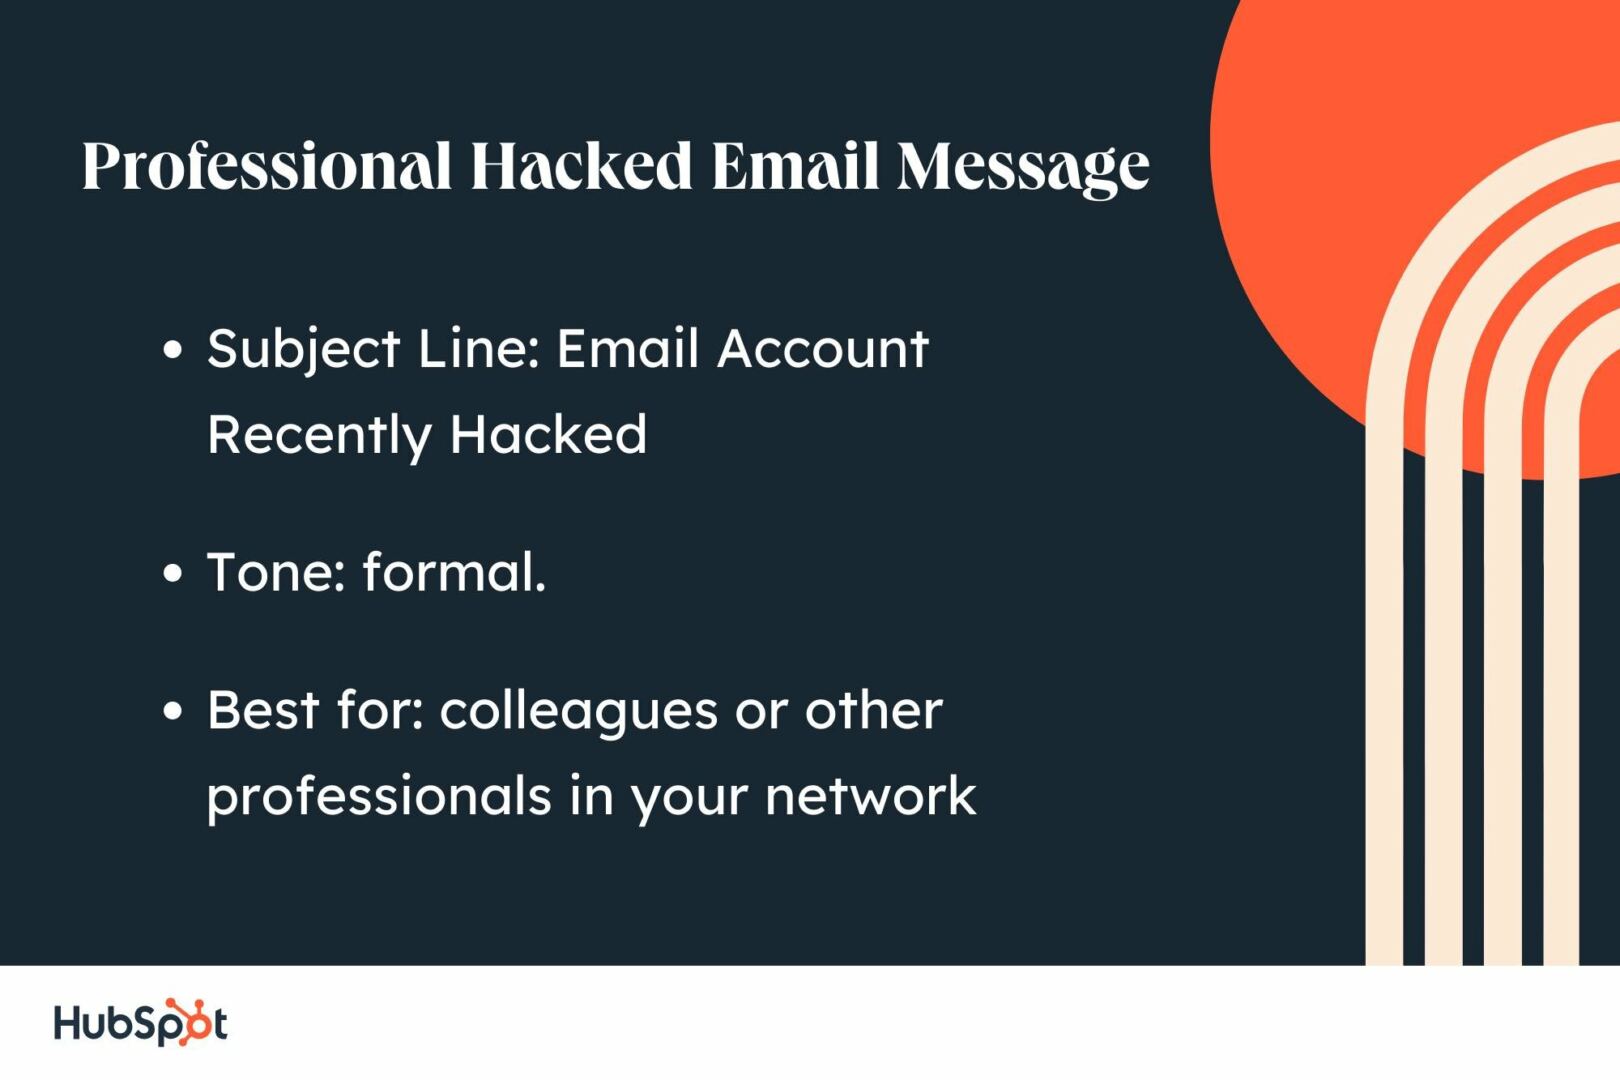 sample letter for hacked email: subject line, email account recently hacked; tone, formal; best for colleagues.